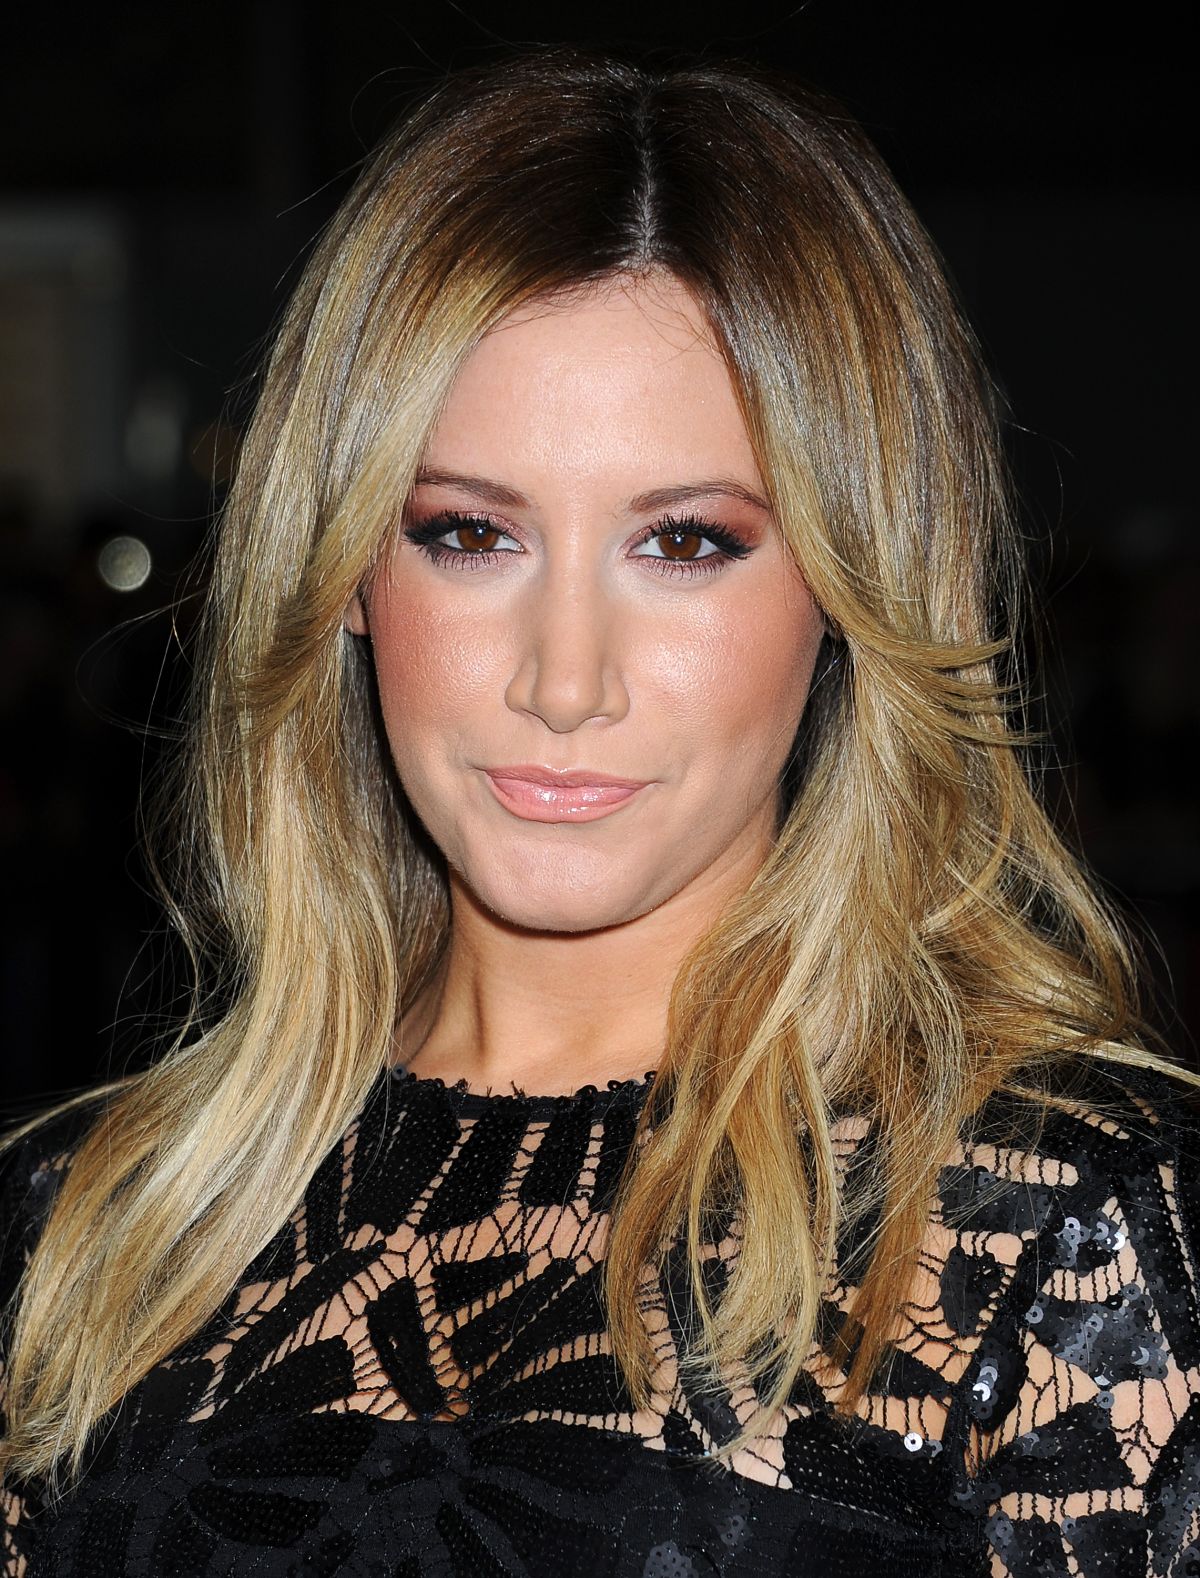 ASHLEY TISDALE at That Awkward Moment Premiere in Los Angeles – HawtCelebs